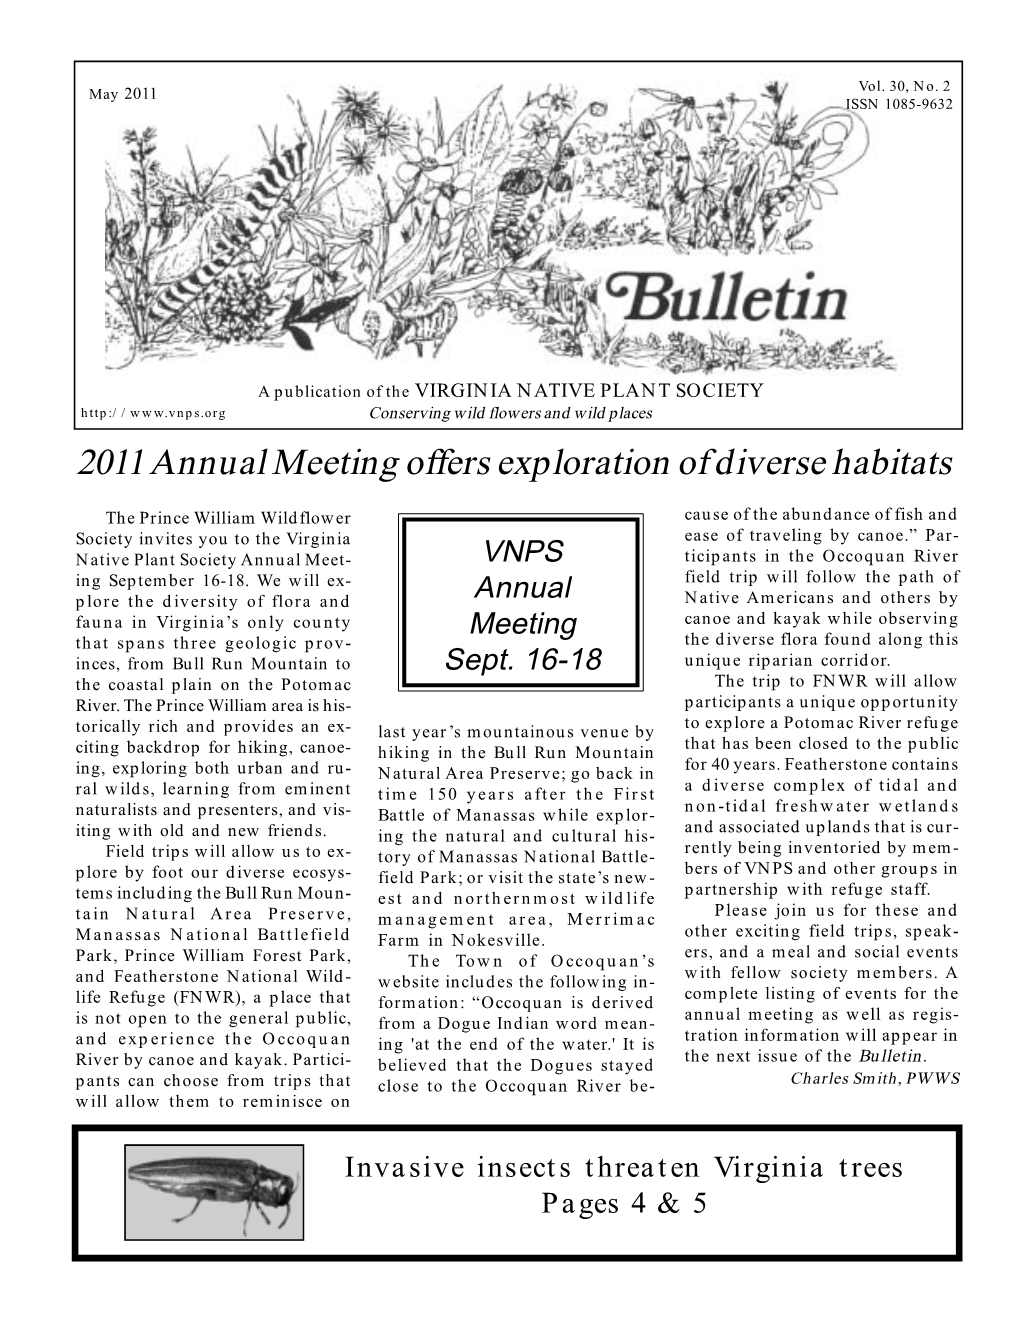 2011 Annual Meeting Offers Exploration of Diverse Habitats